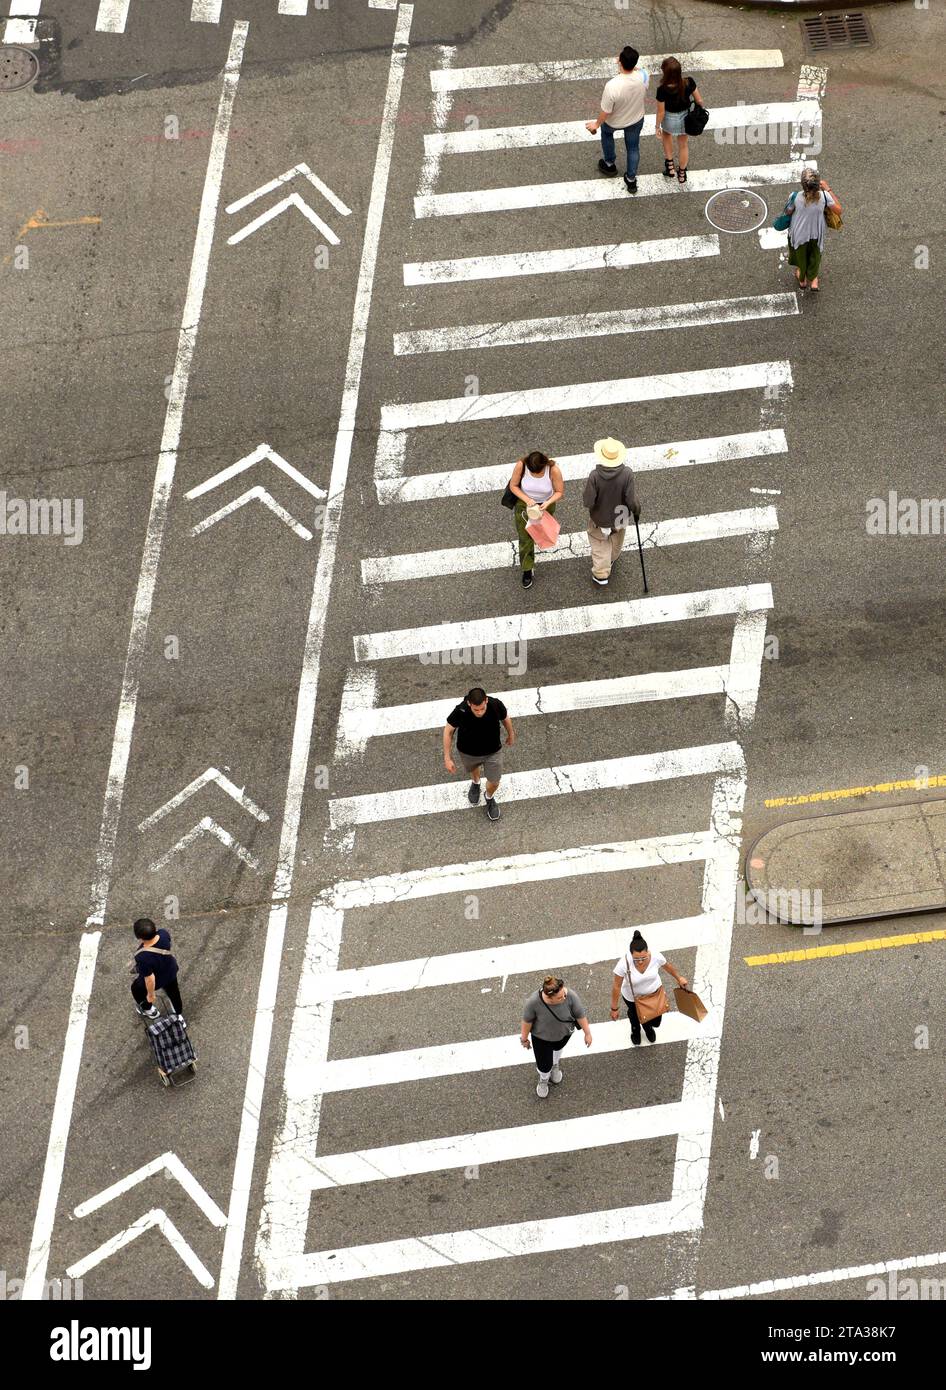 New York, USA - June 9, 2018: People walking on zebra crossings in New York. Looking down from skyscraper on the busy streets in New York. Stock Photo